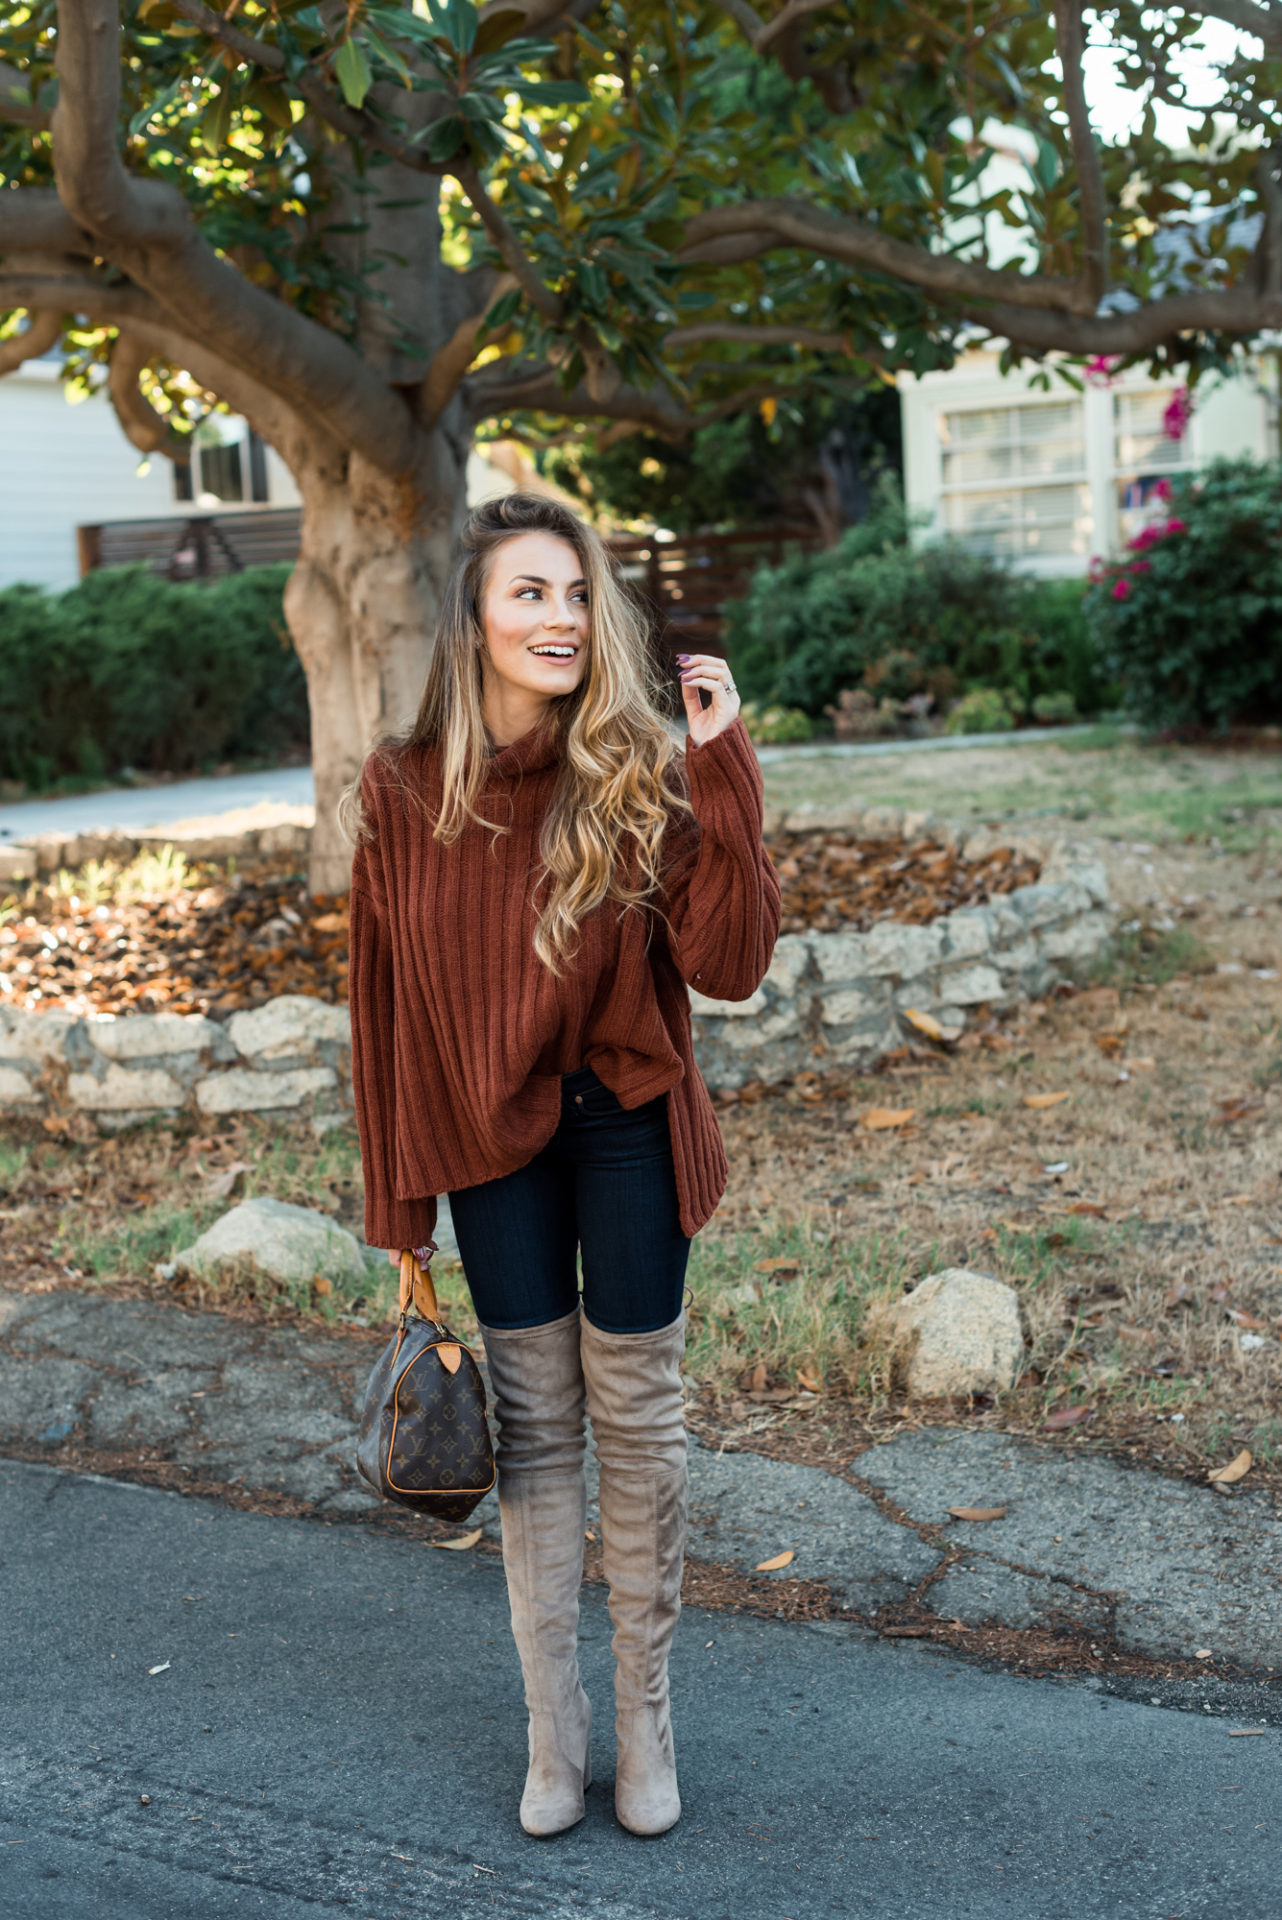 10 Most Popular Fall Outfits on Pinterest - Hello Gorgeous, by Angela ...